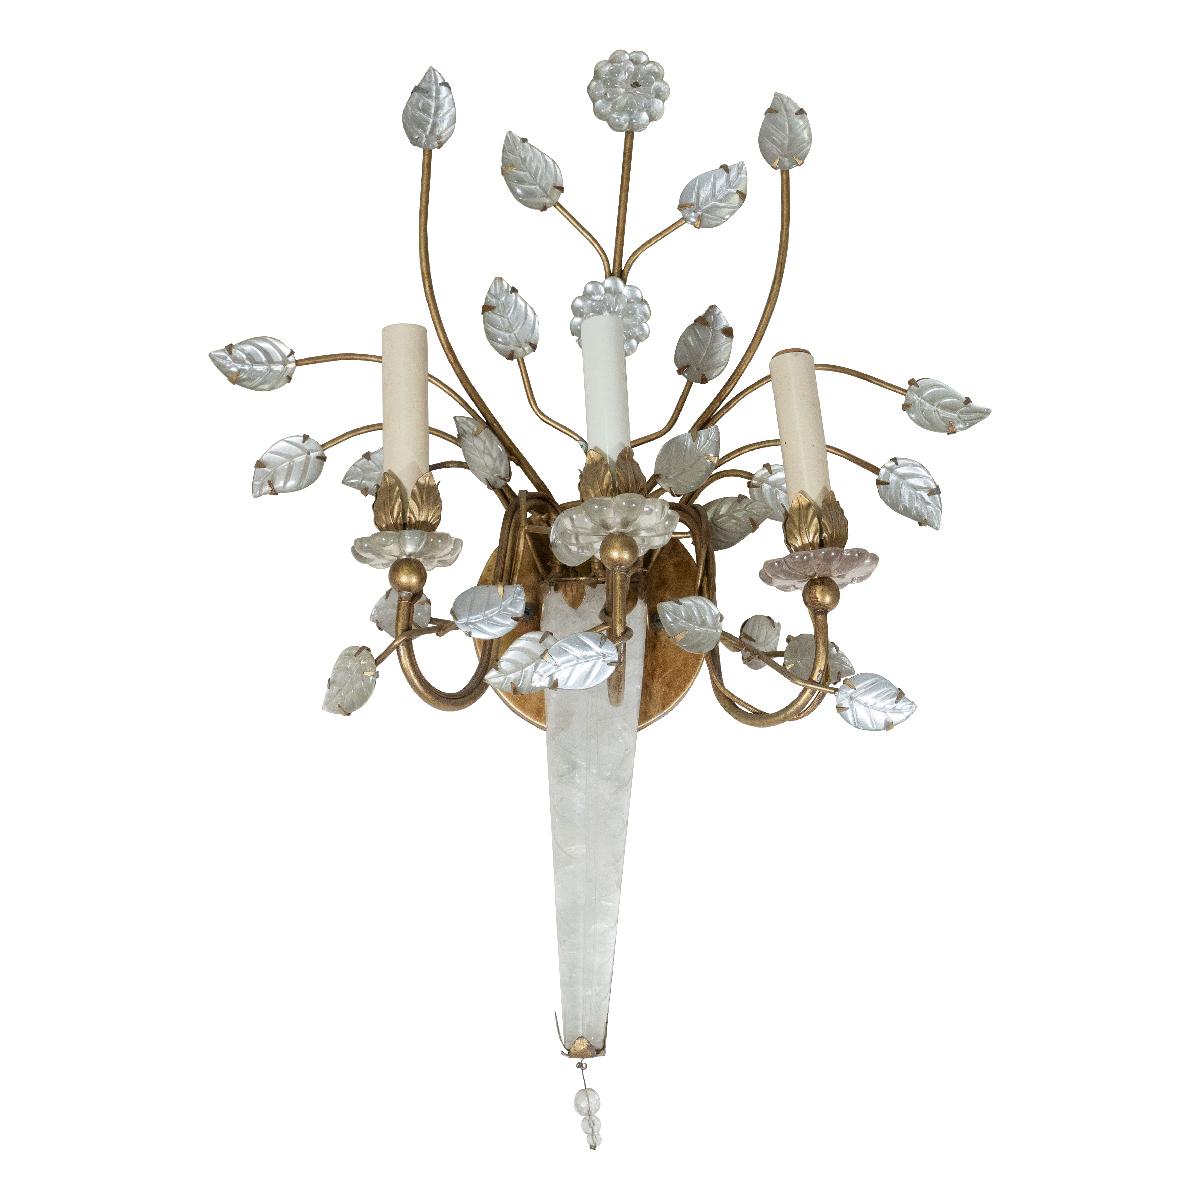 Single brass sconce with crystal and reverse silver leafed floral motif and rock crystal details in the style of Bagues.